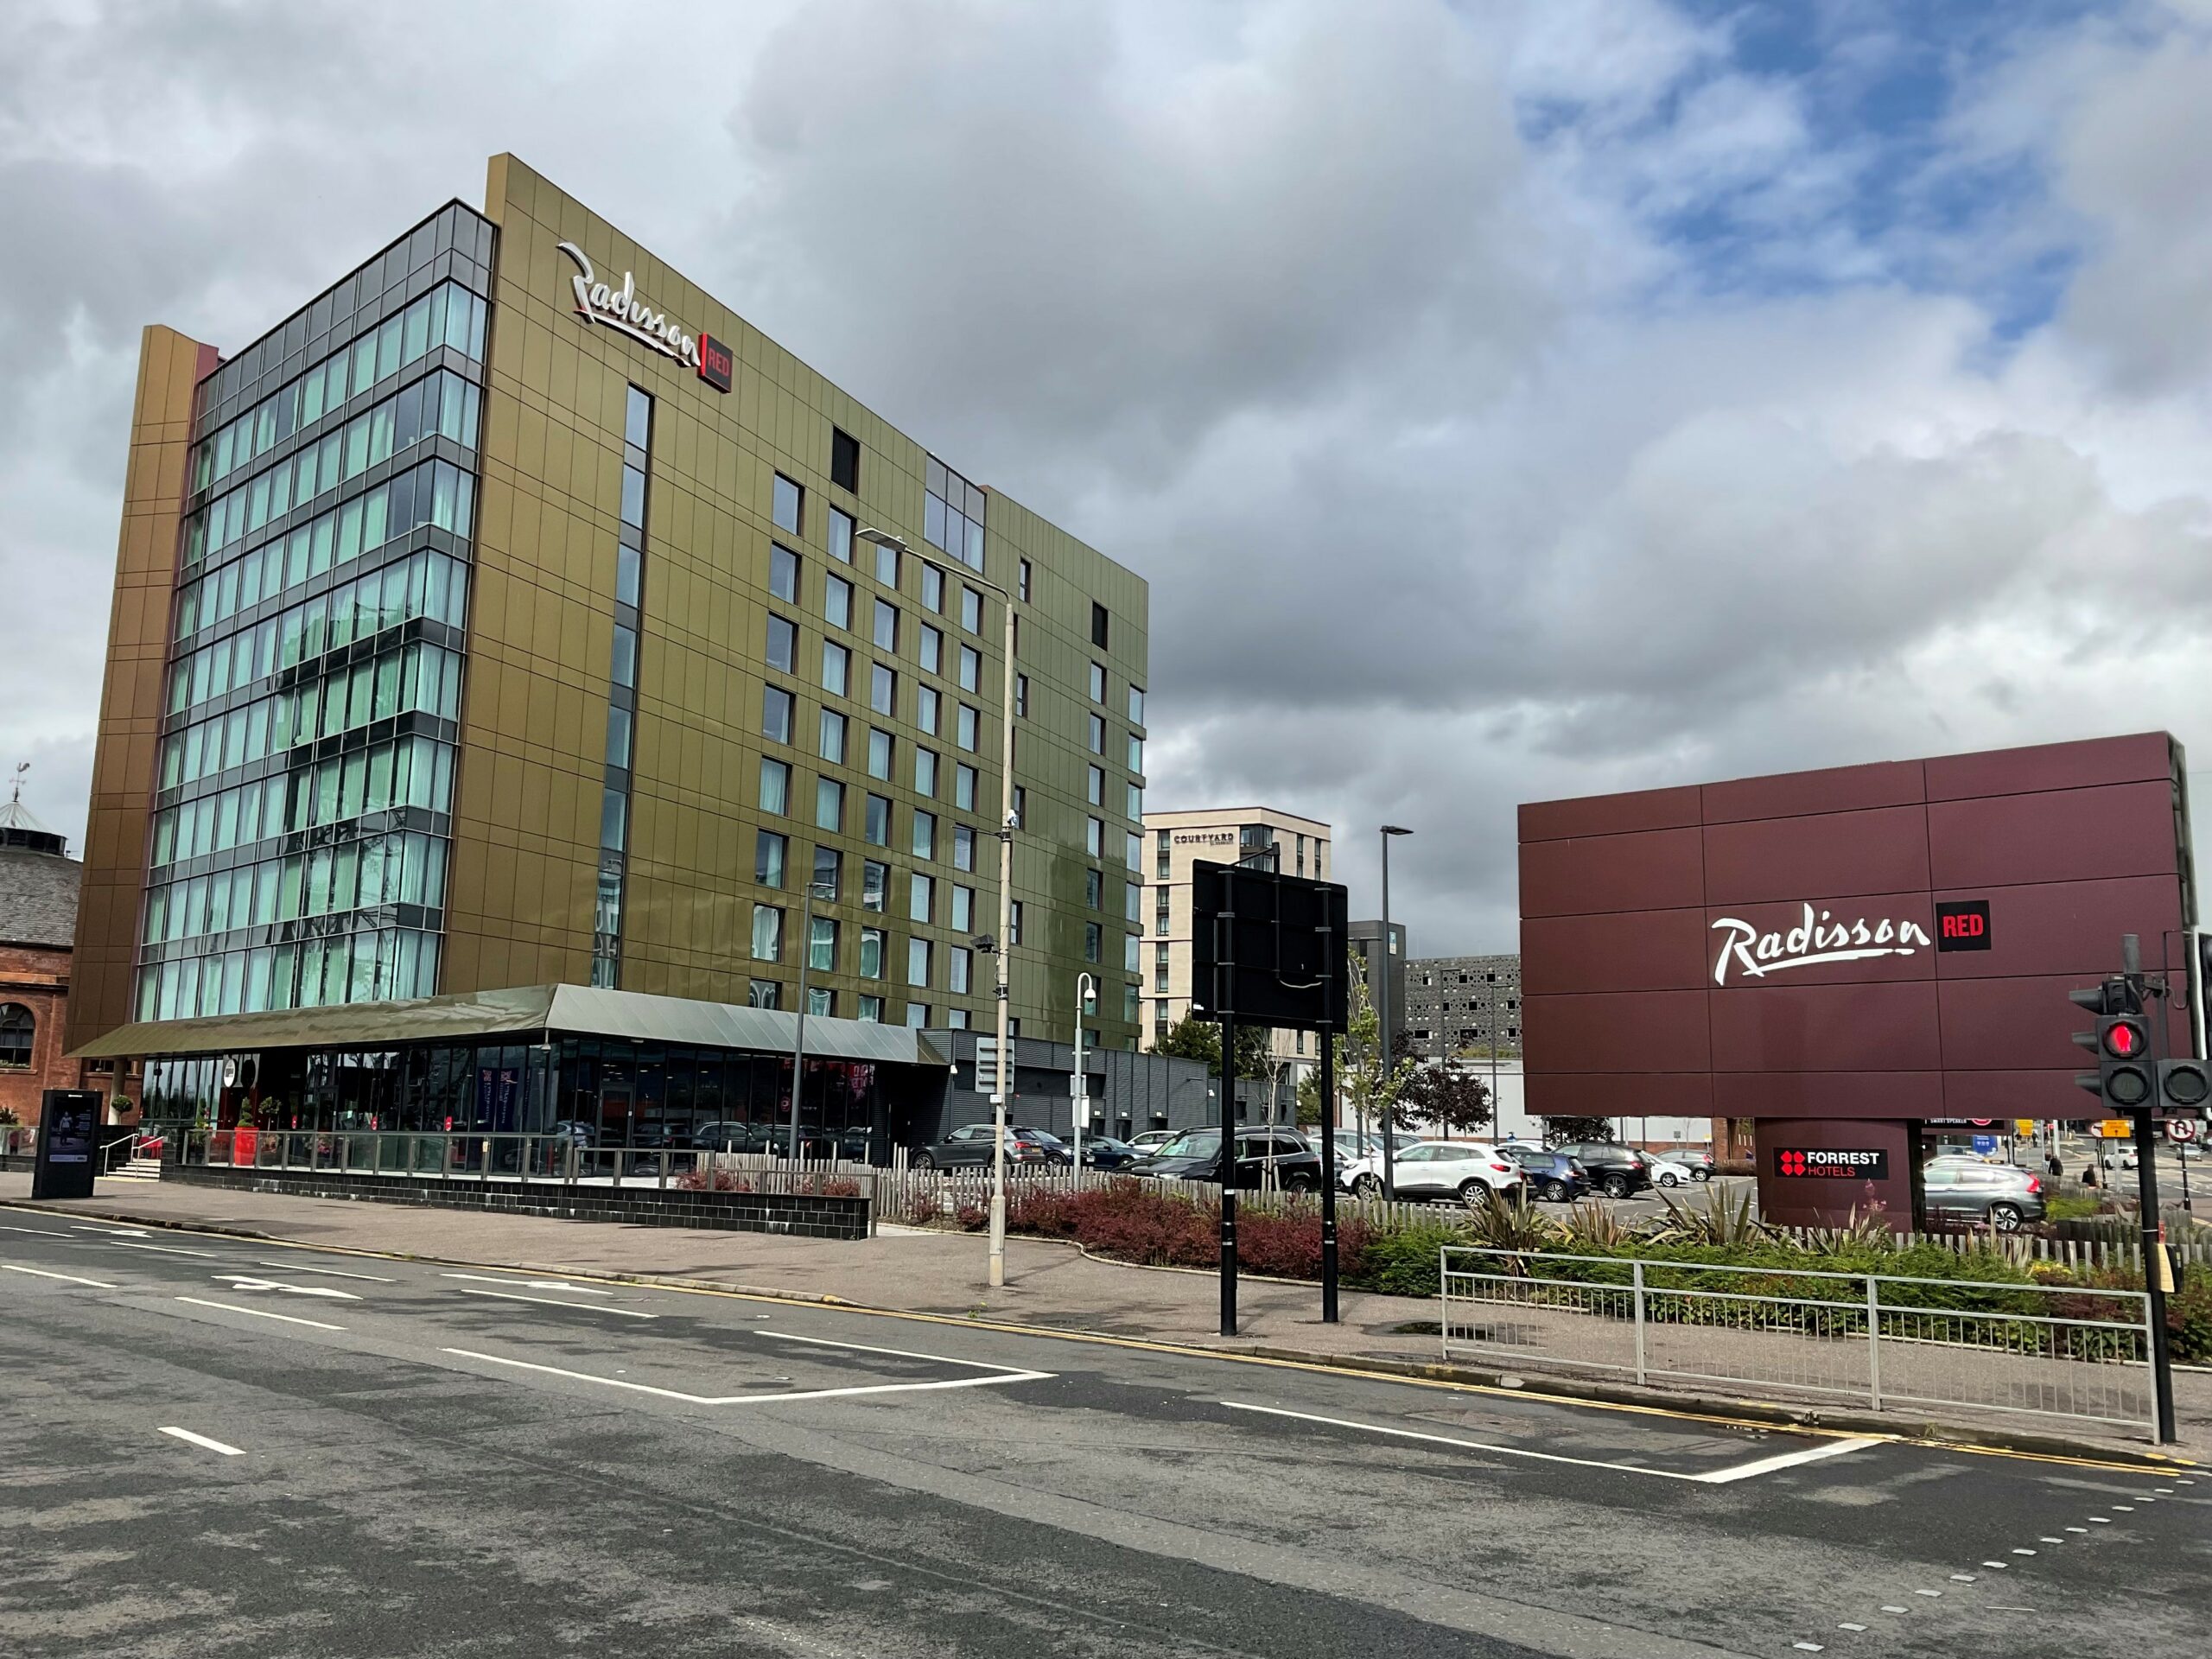 REVIEW: Radisson RED Glasgow Turning left for